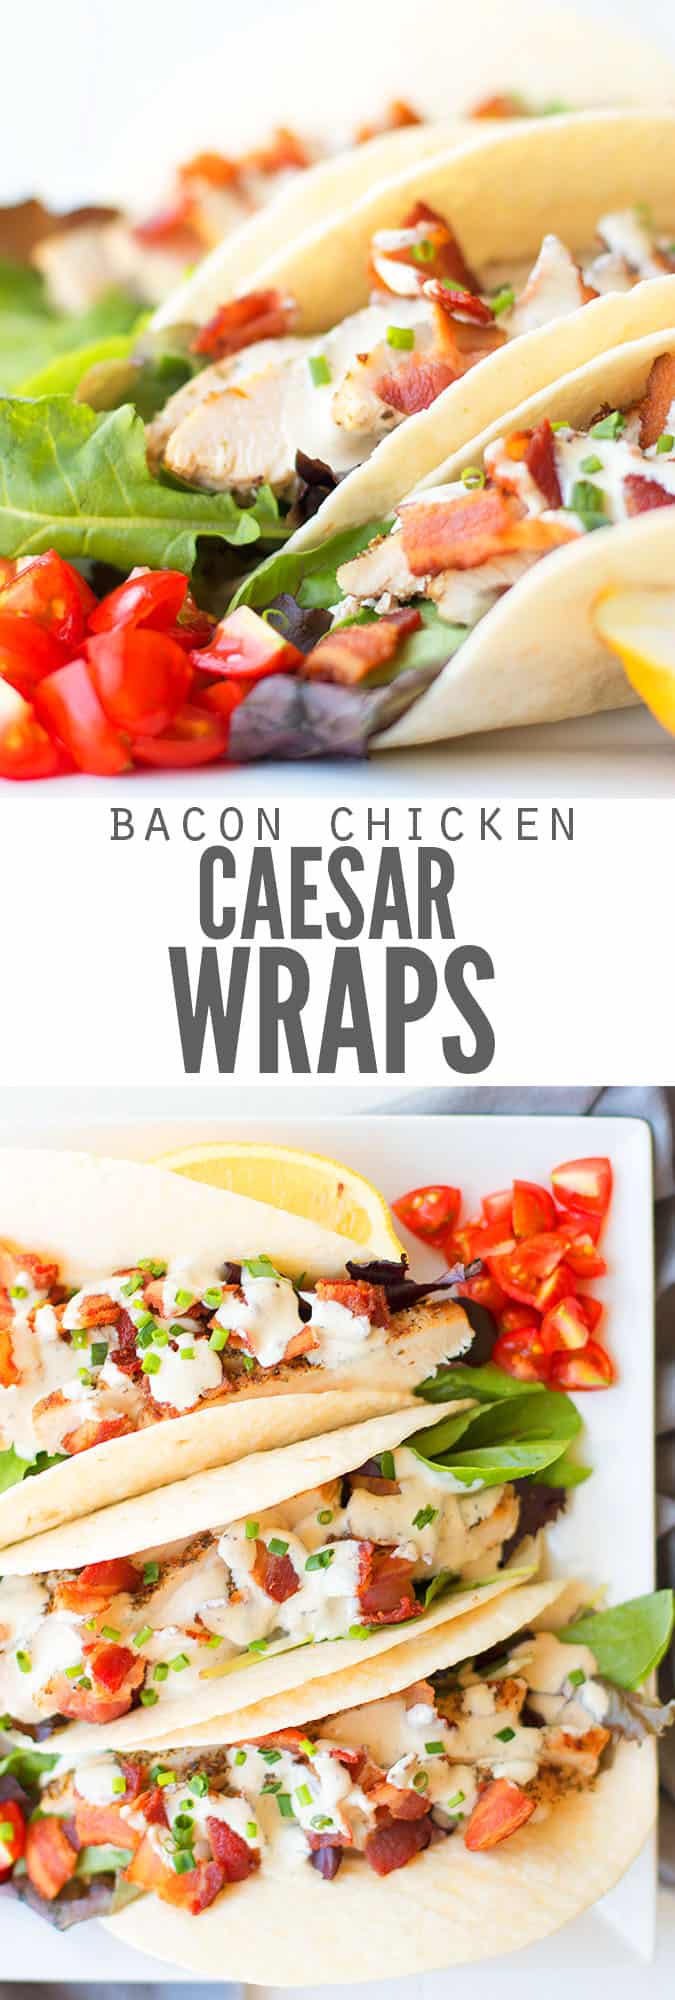 These bacon chicken Caesar salad wraps are better than the restaurant! Easy recipe using shredded or crispy chicken, served with potatoes for an easy meal.